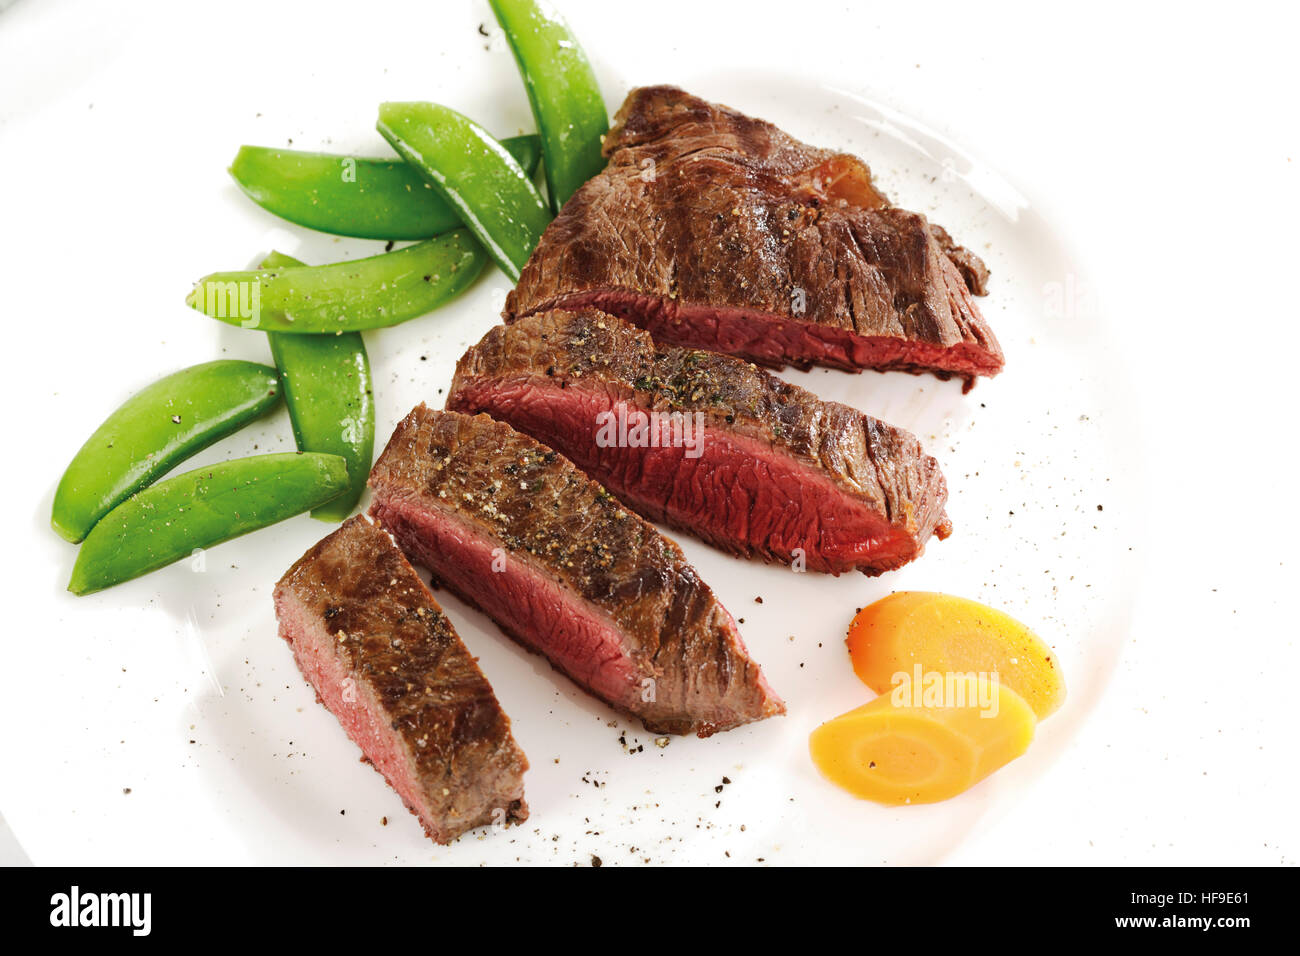 Steak cut into slices with carrots and snow peas Stock Photo